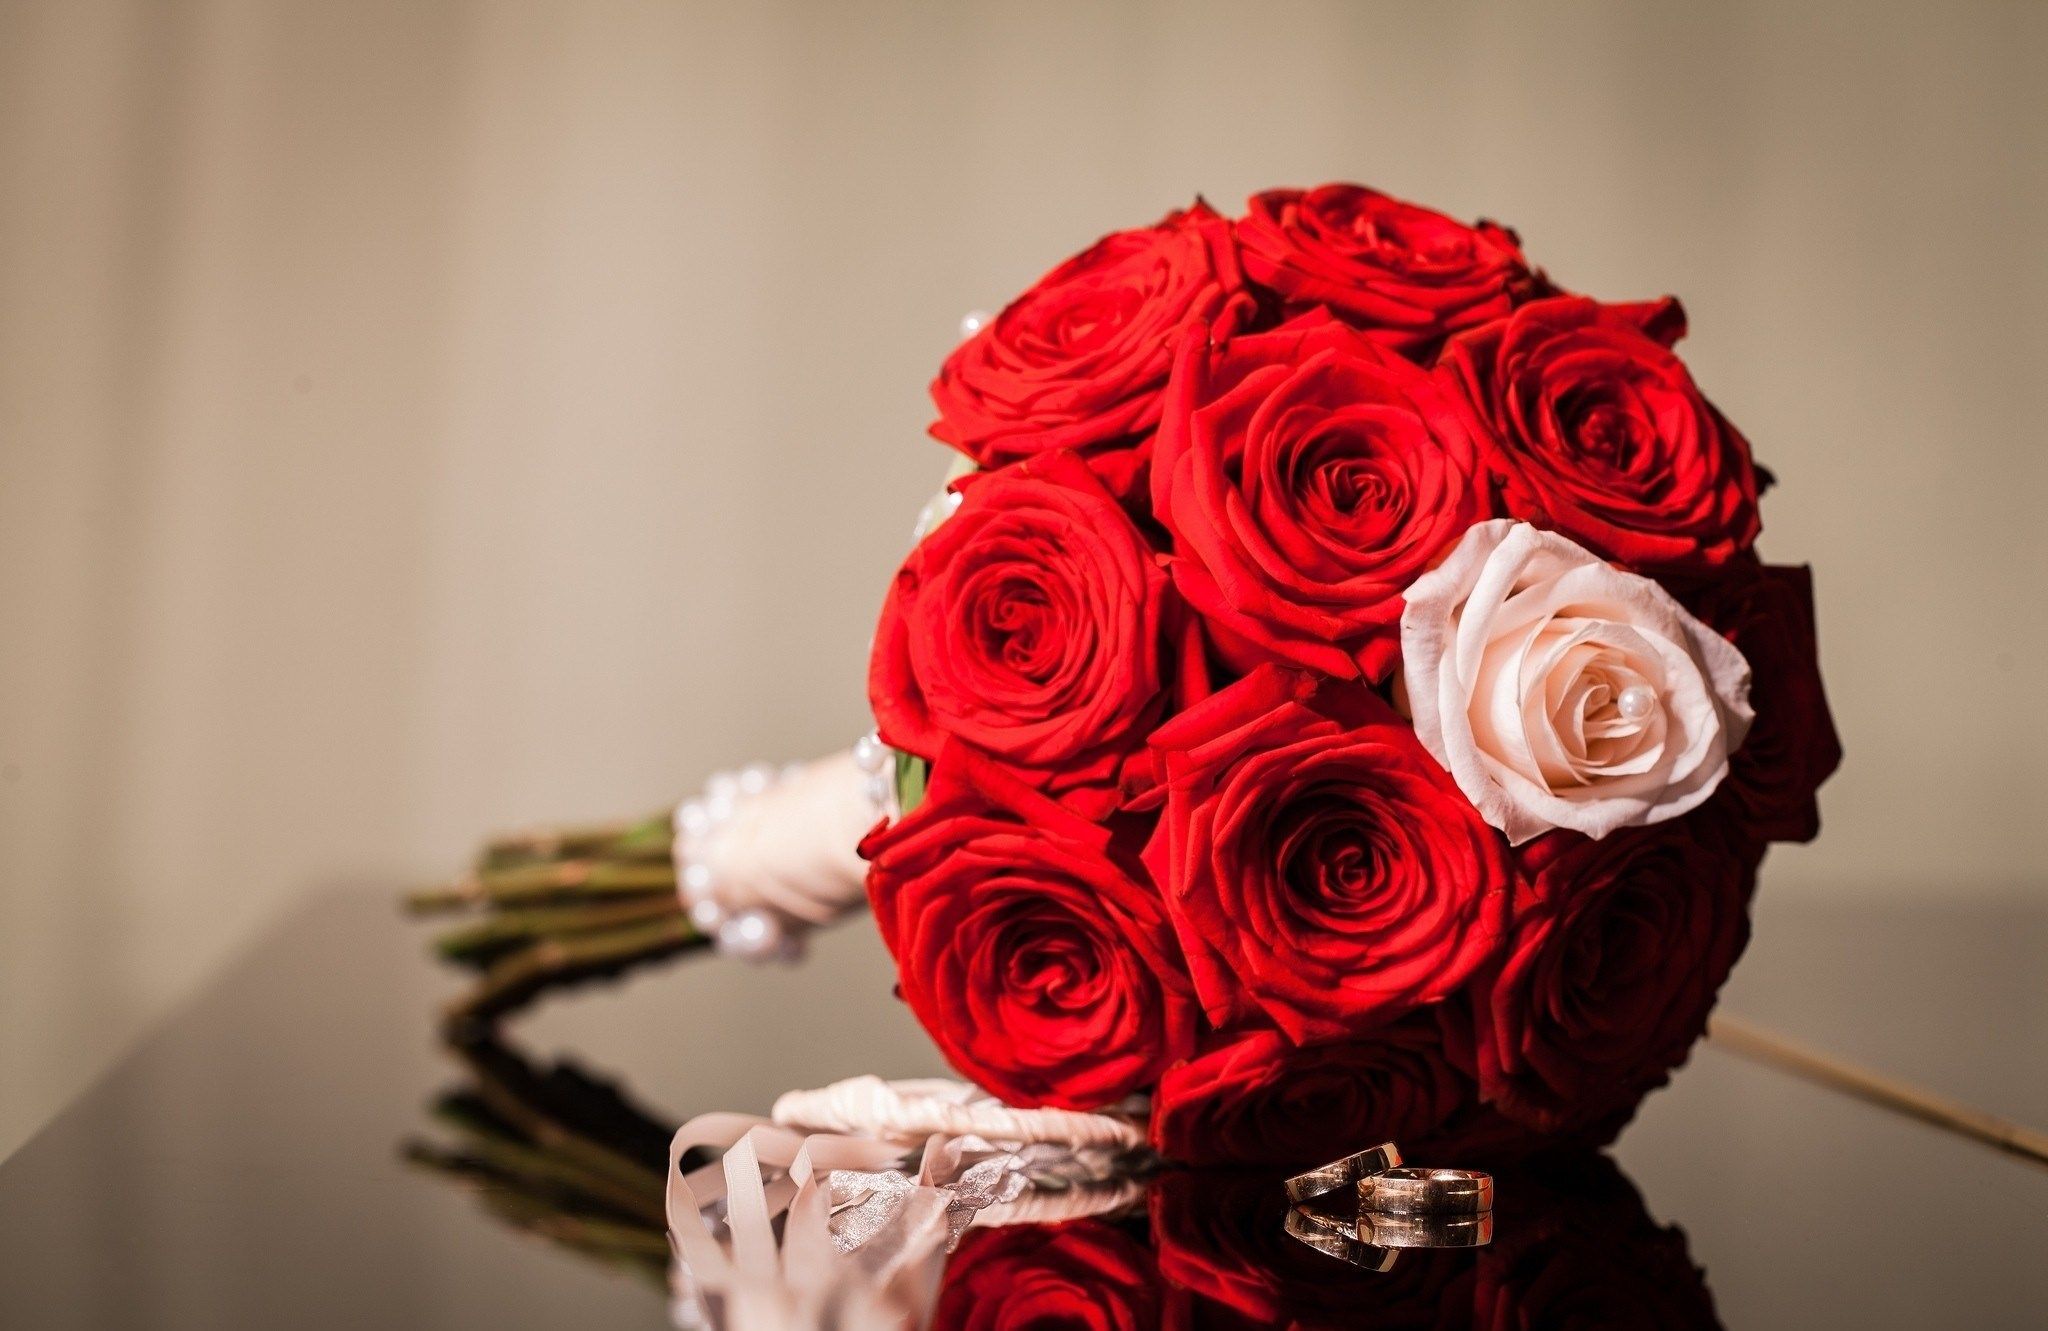 Flowers Red Rings Roses Bouquet Wallpaper Rose Wallpaper Of Flowers